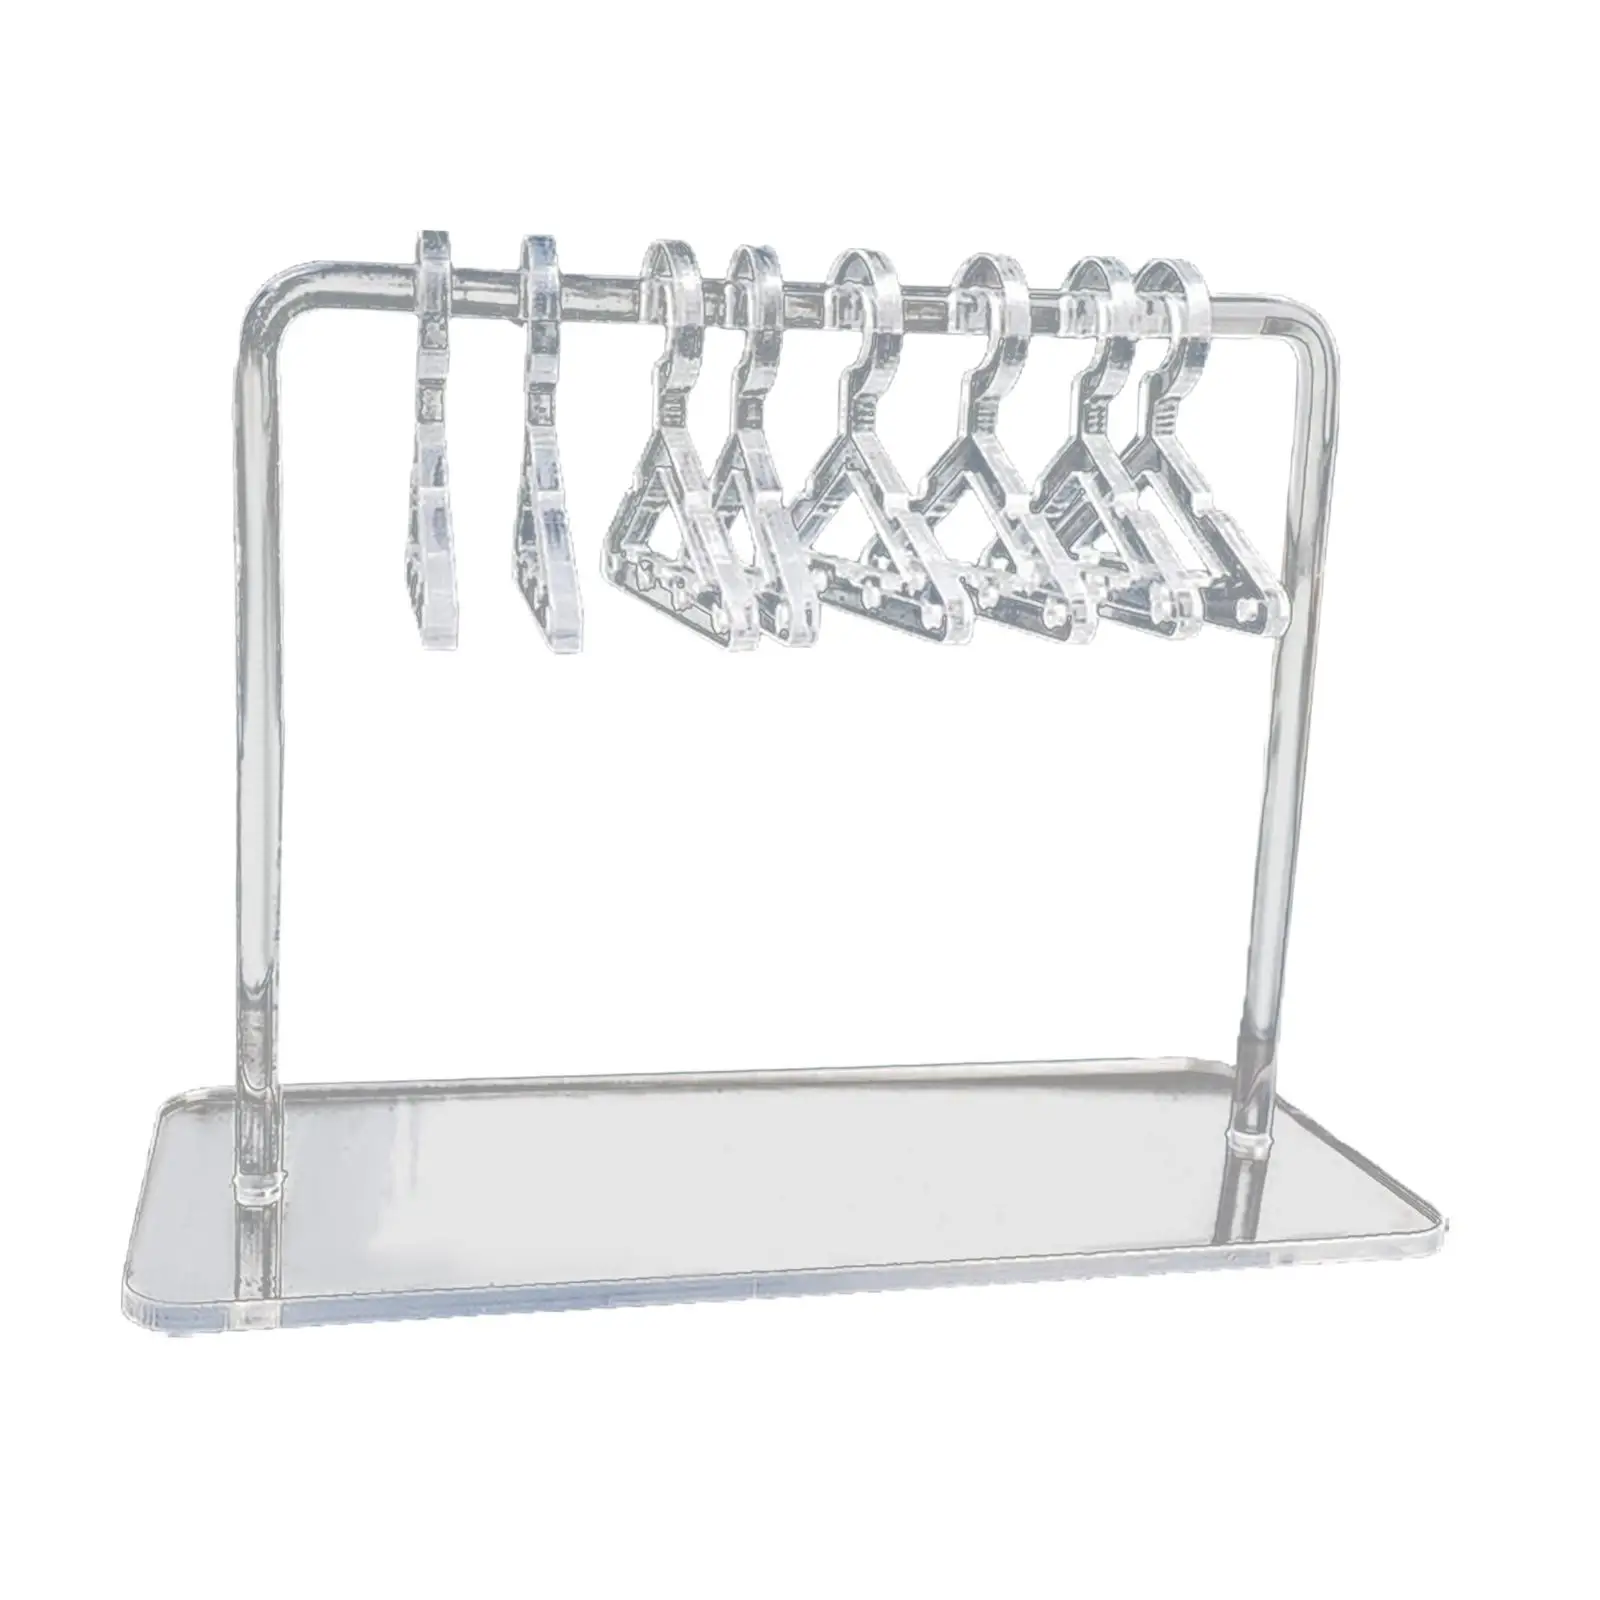 Acrylic Earring Display Stand Jewelry Display Earring Holder Hanging Earrings Storage Rack Live Broadcast Props Jewelry Store